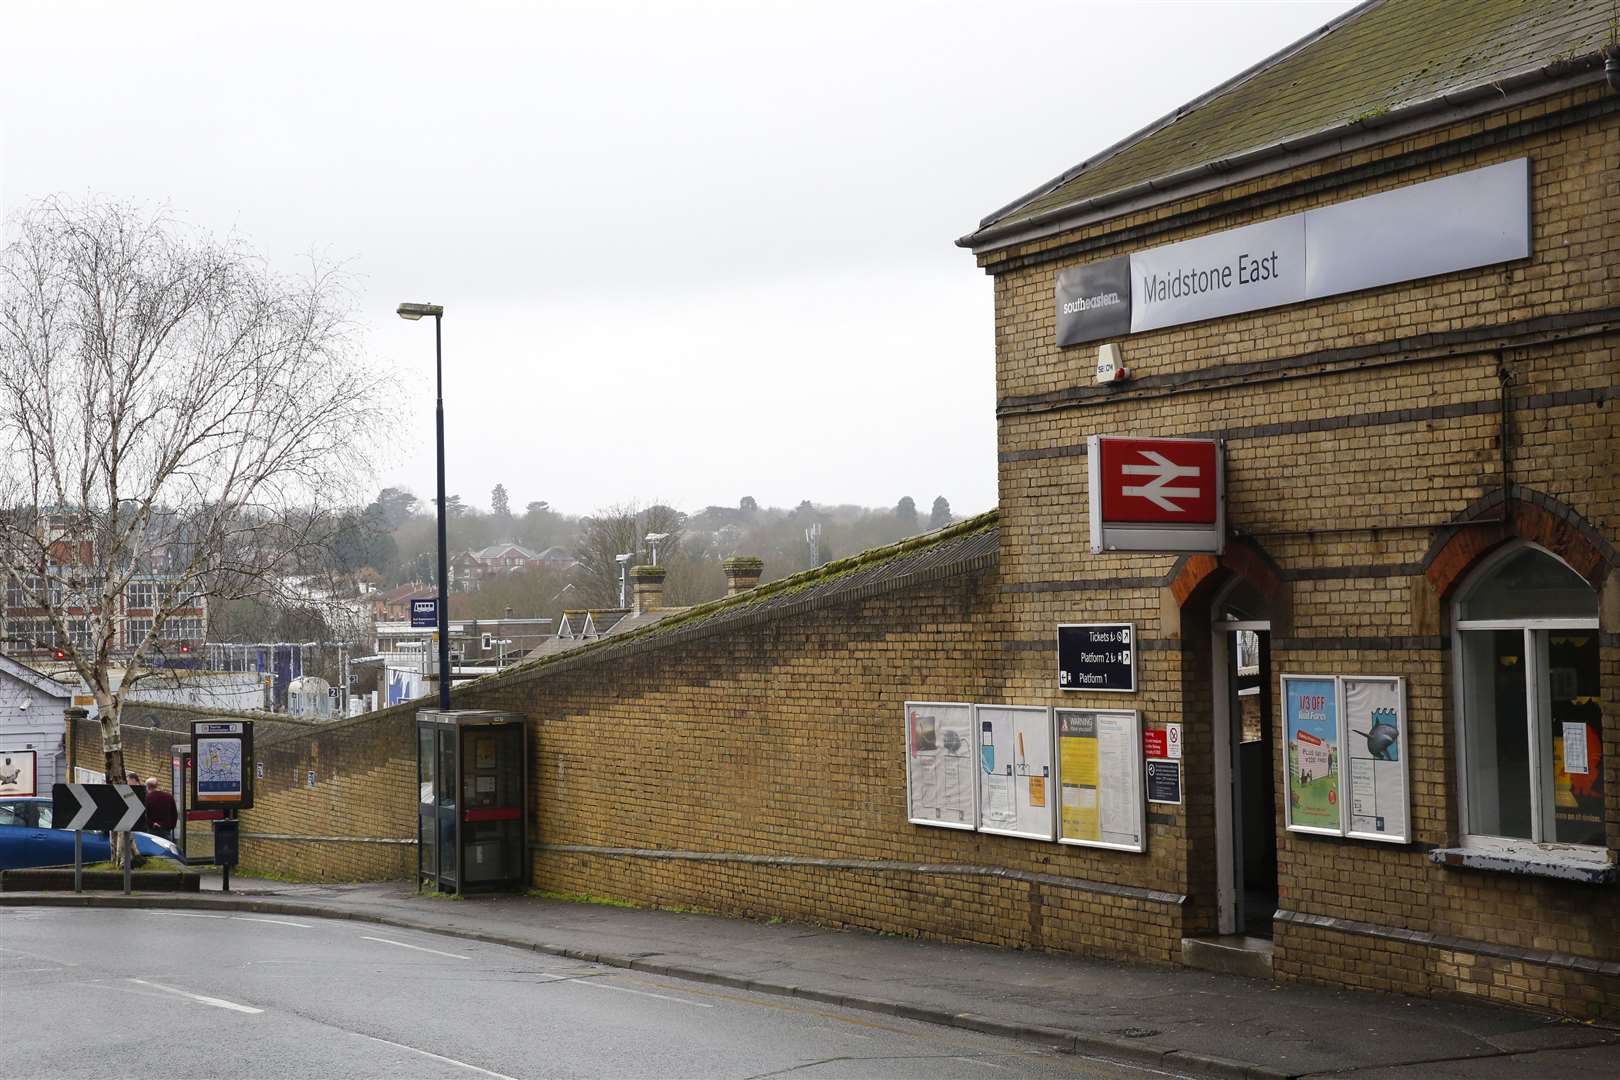 Maidstone East train station off Week Street, Maidstone.Picture: Martin Apps